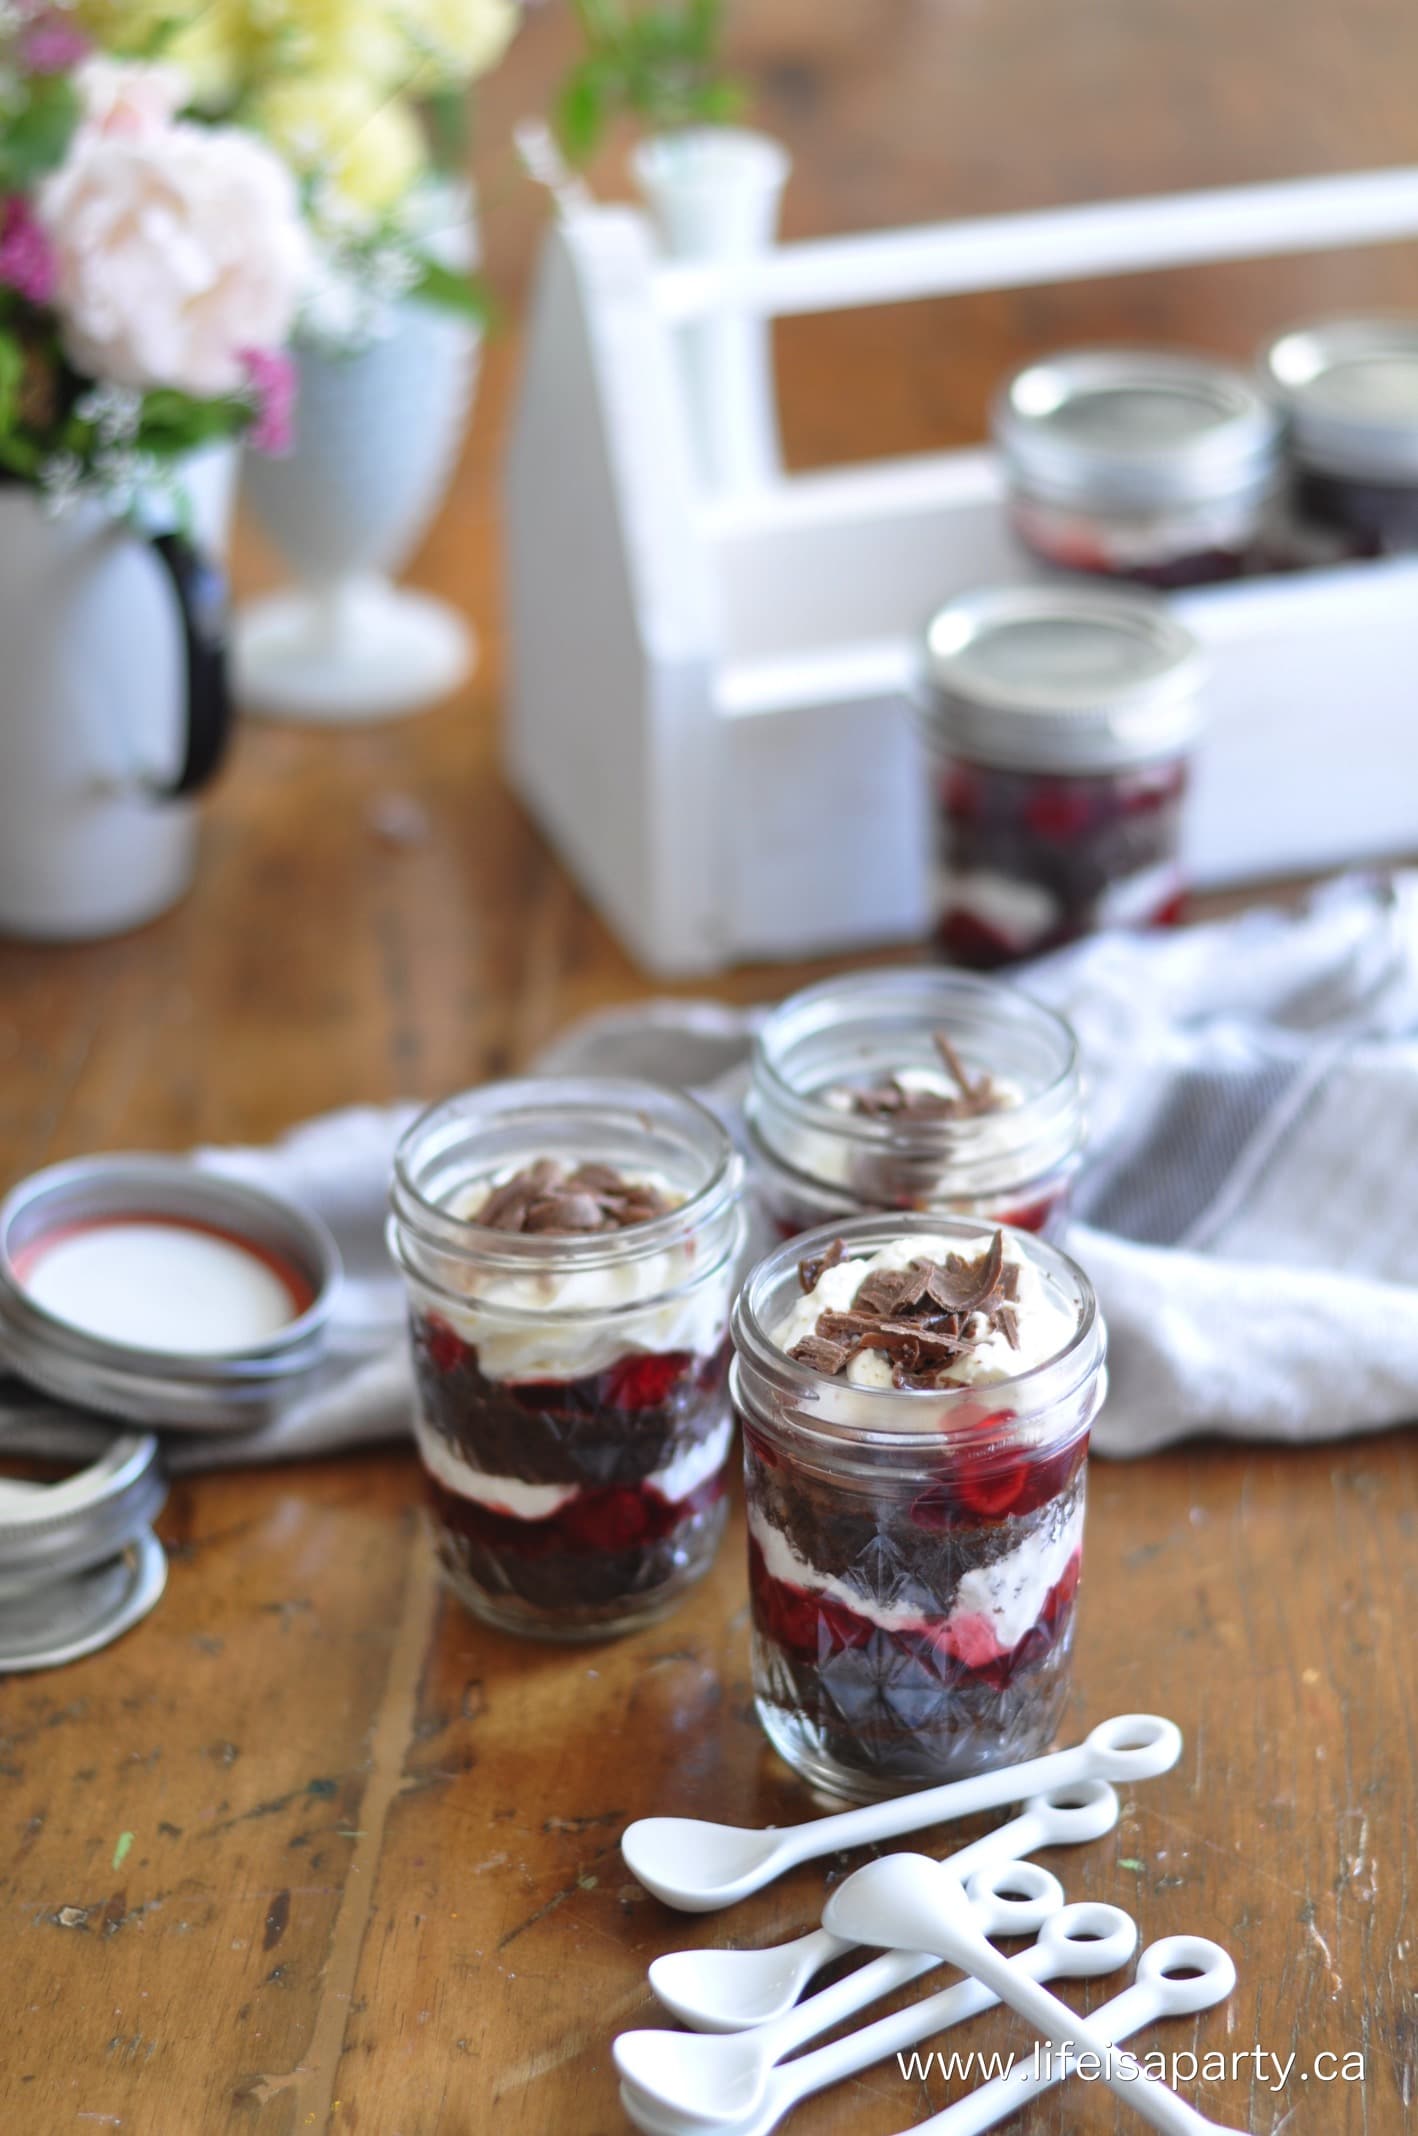 Black Forest Cake in a Mason Jar ready for a picnic